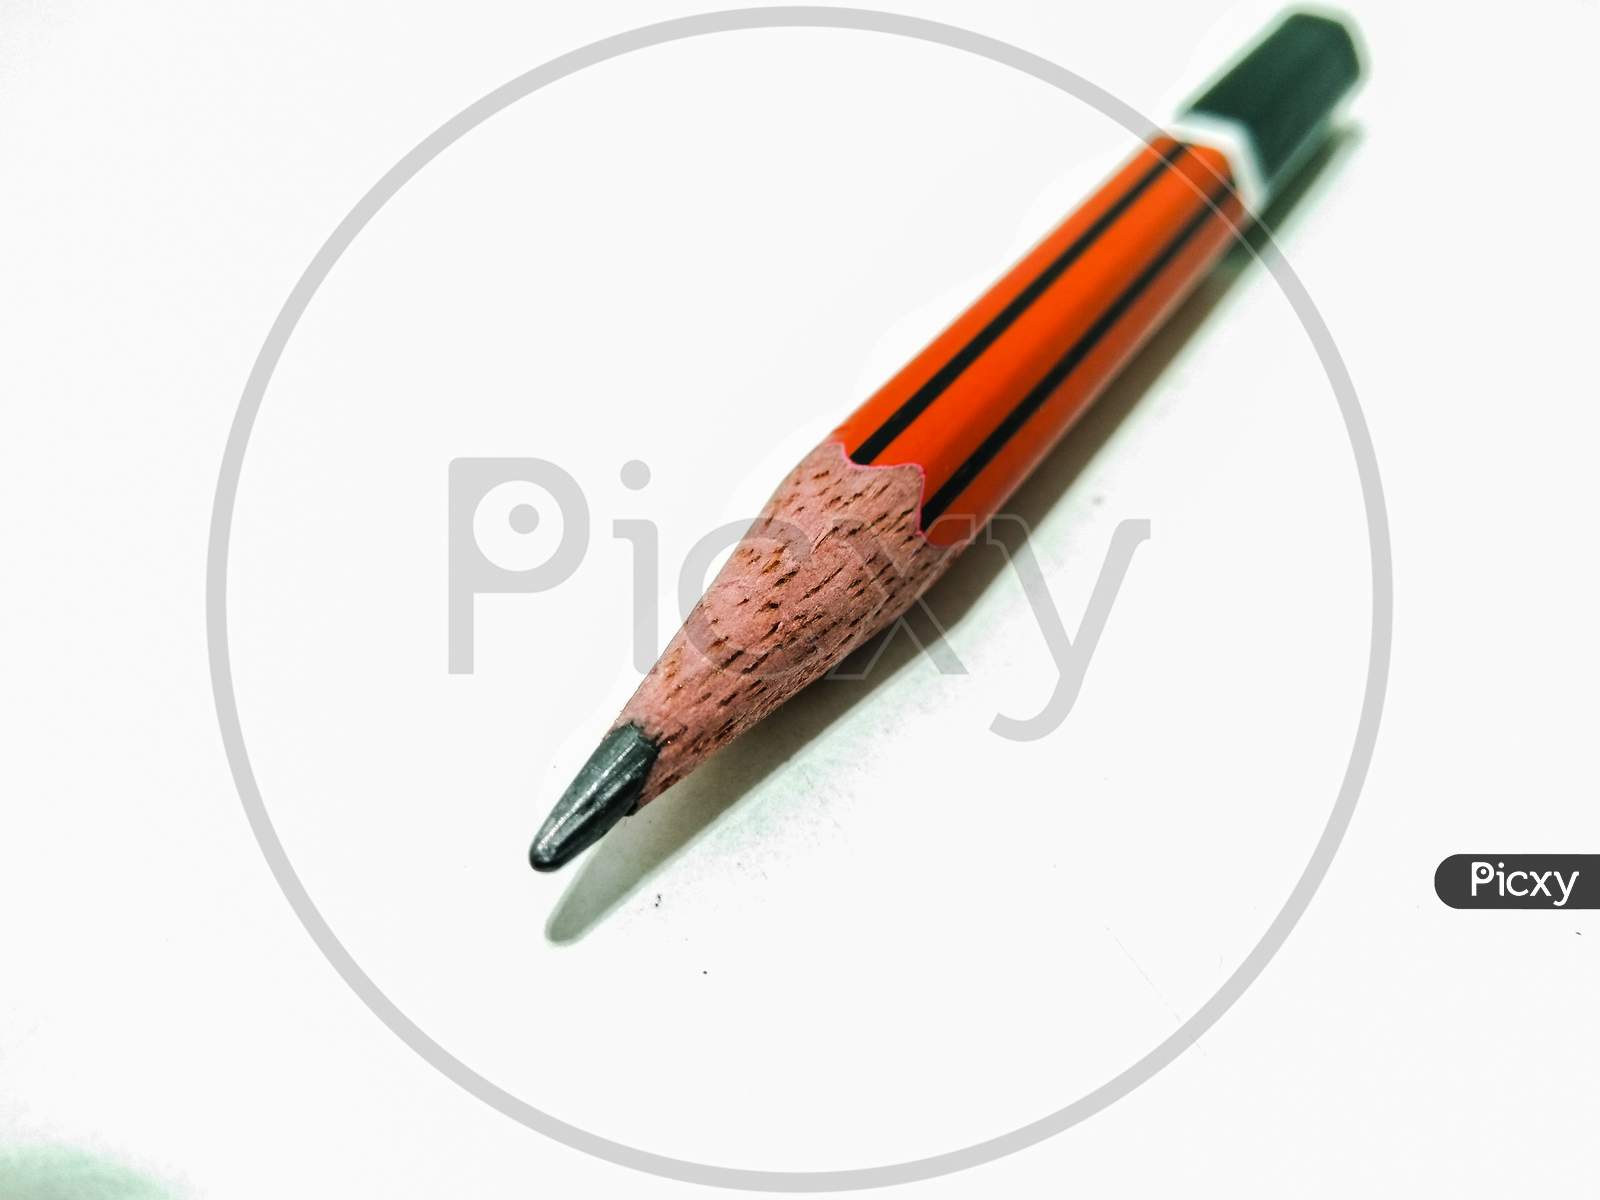 A picture of pencil